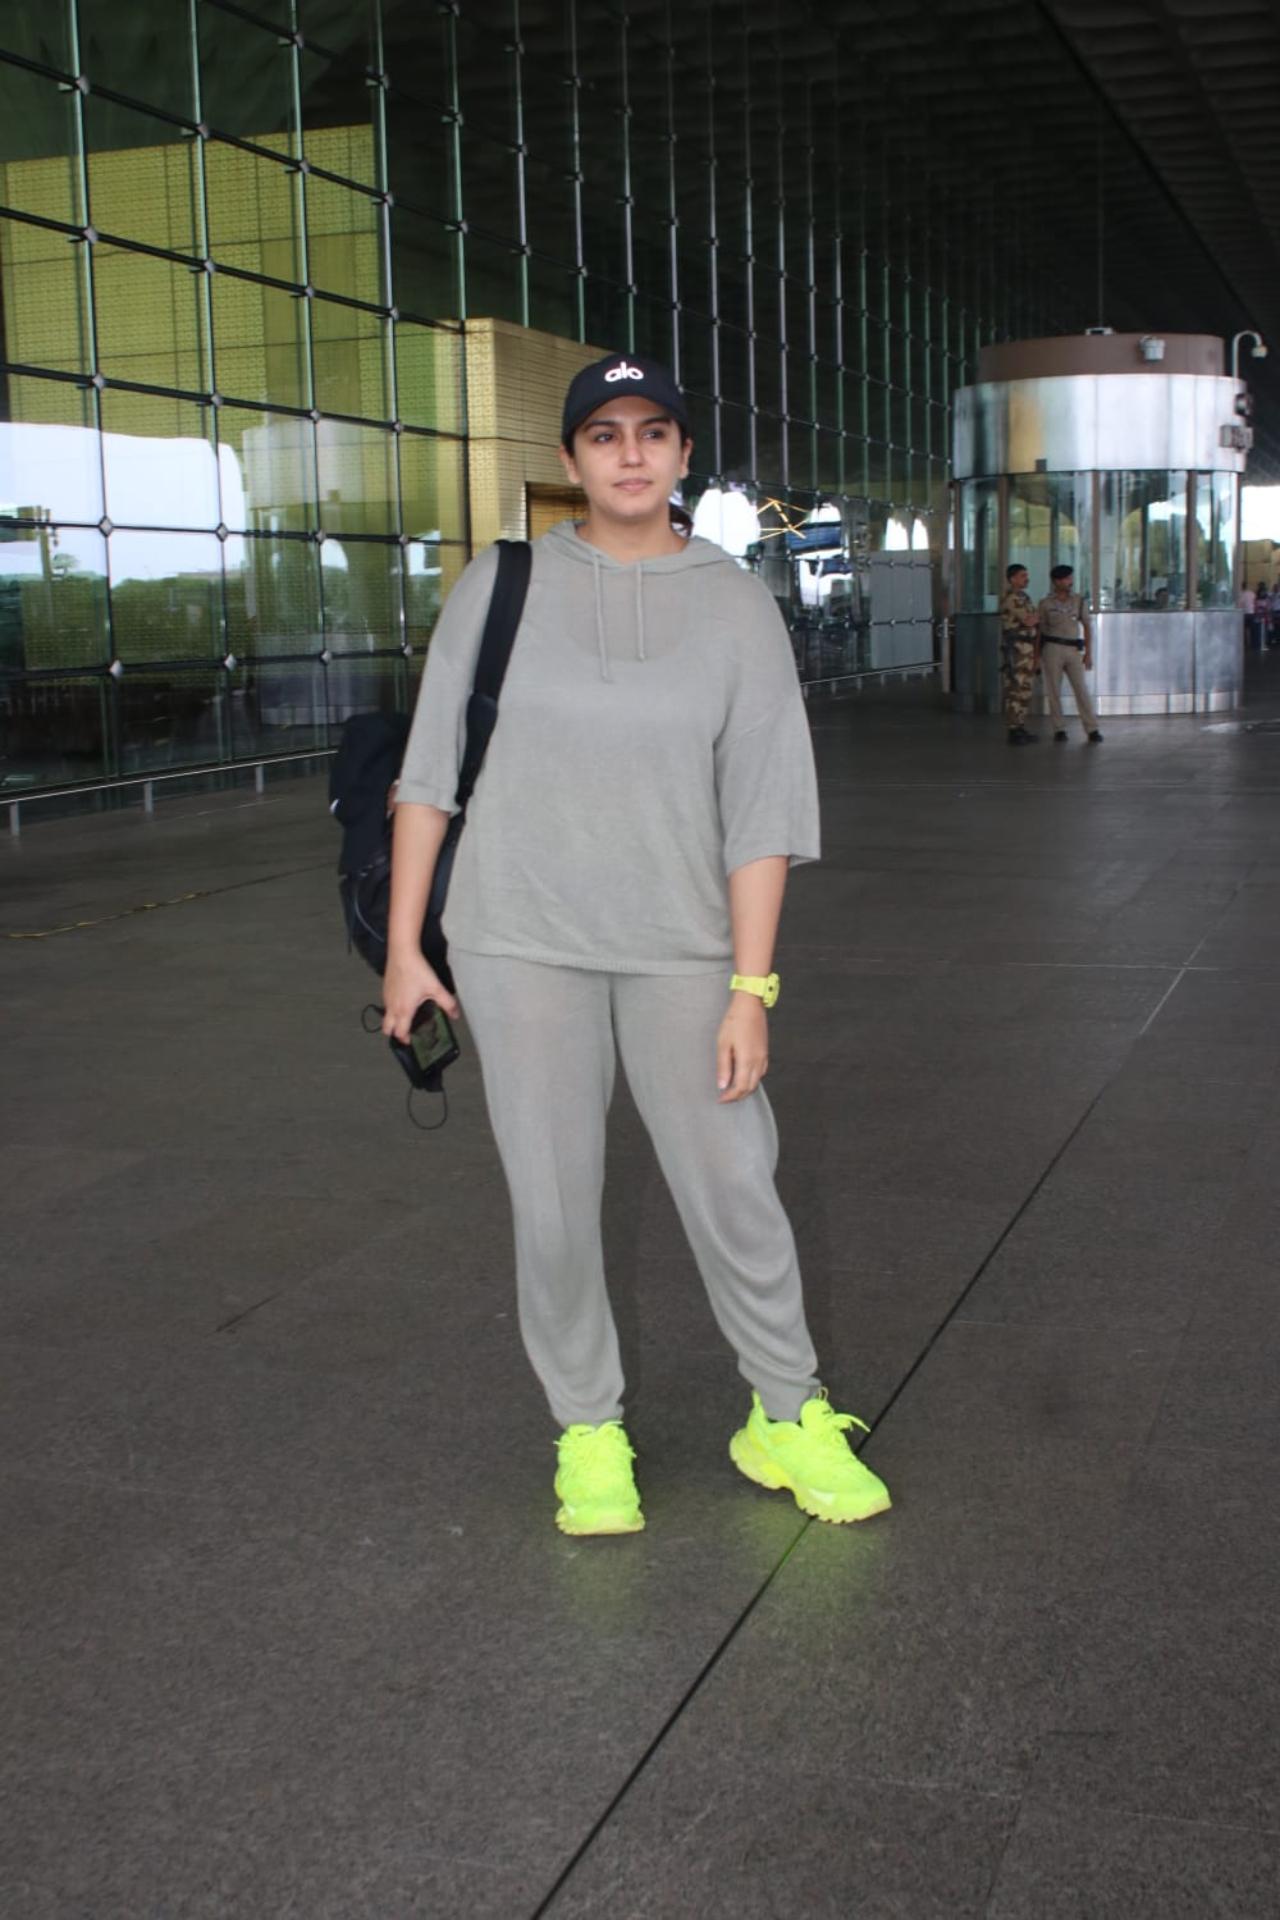 Huma Qureshi was also spotted at the airport today. The 'Tarla' actress had dressed comfortably in grey sweatpants and neon shoes for a possibly long flight ahead